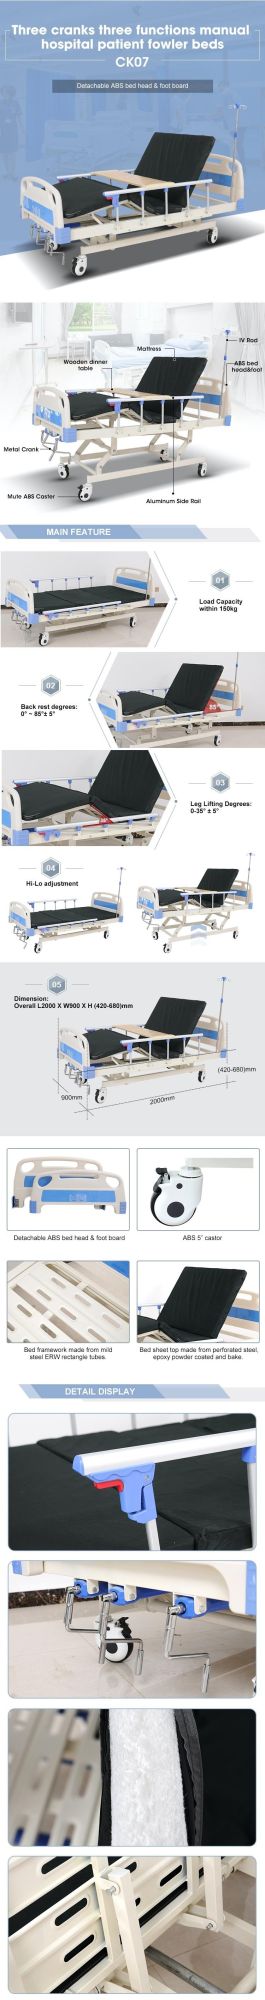 Best Price Manual Three Cranks 3 Function Hospital Bed ABS Patient Bed Medical Equipment Fowler Bed